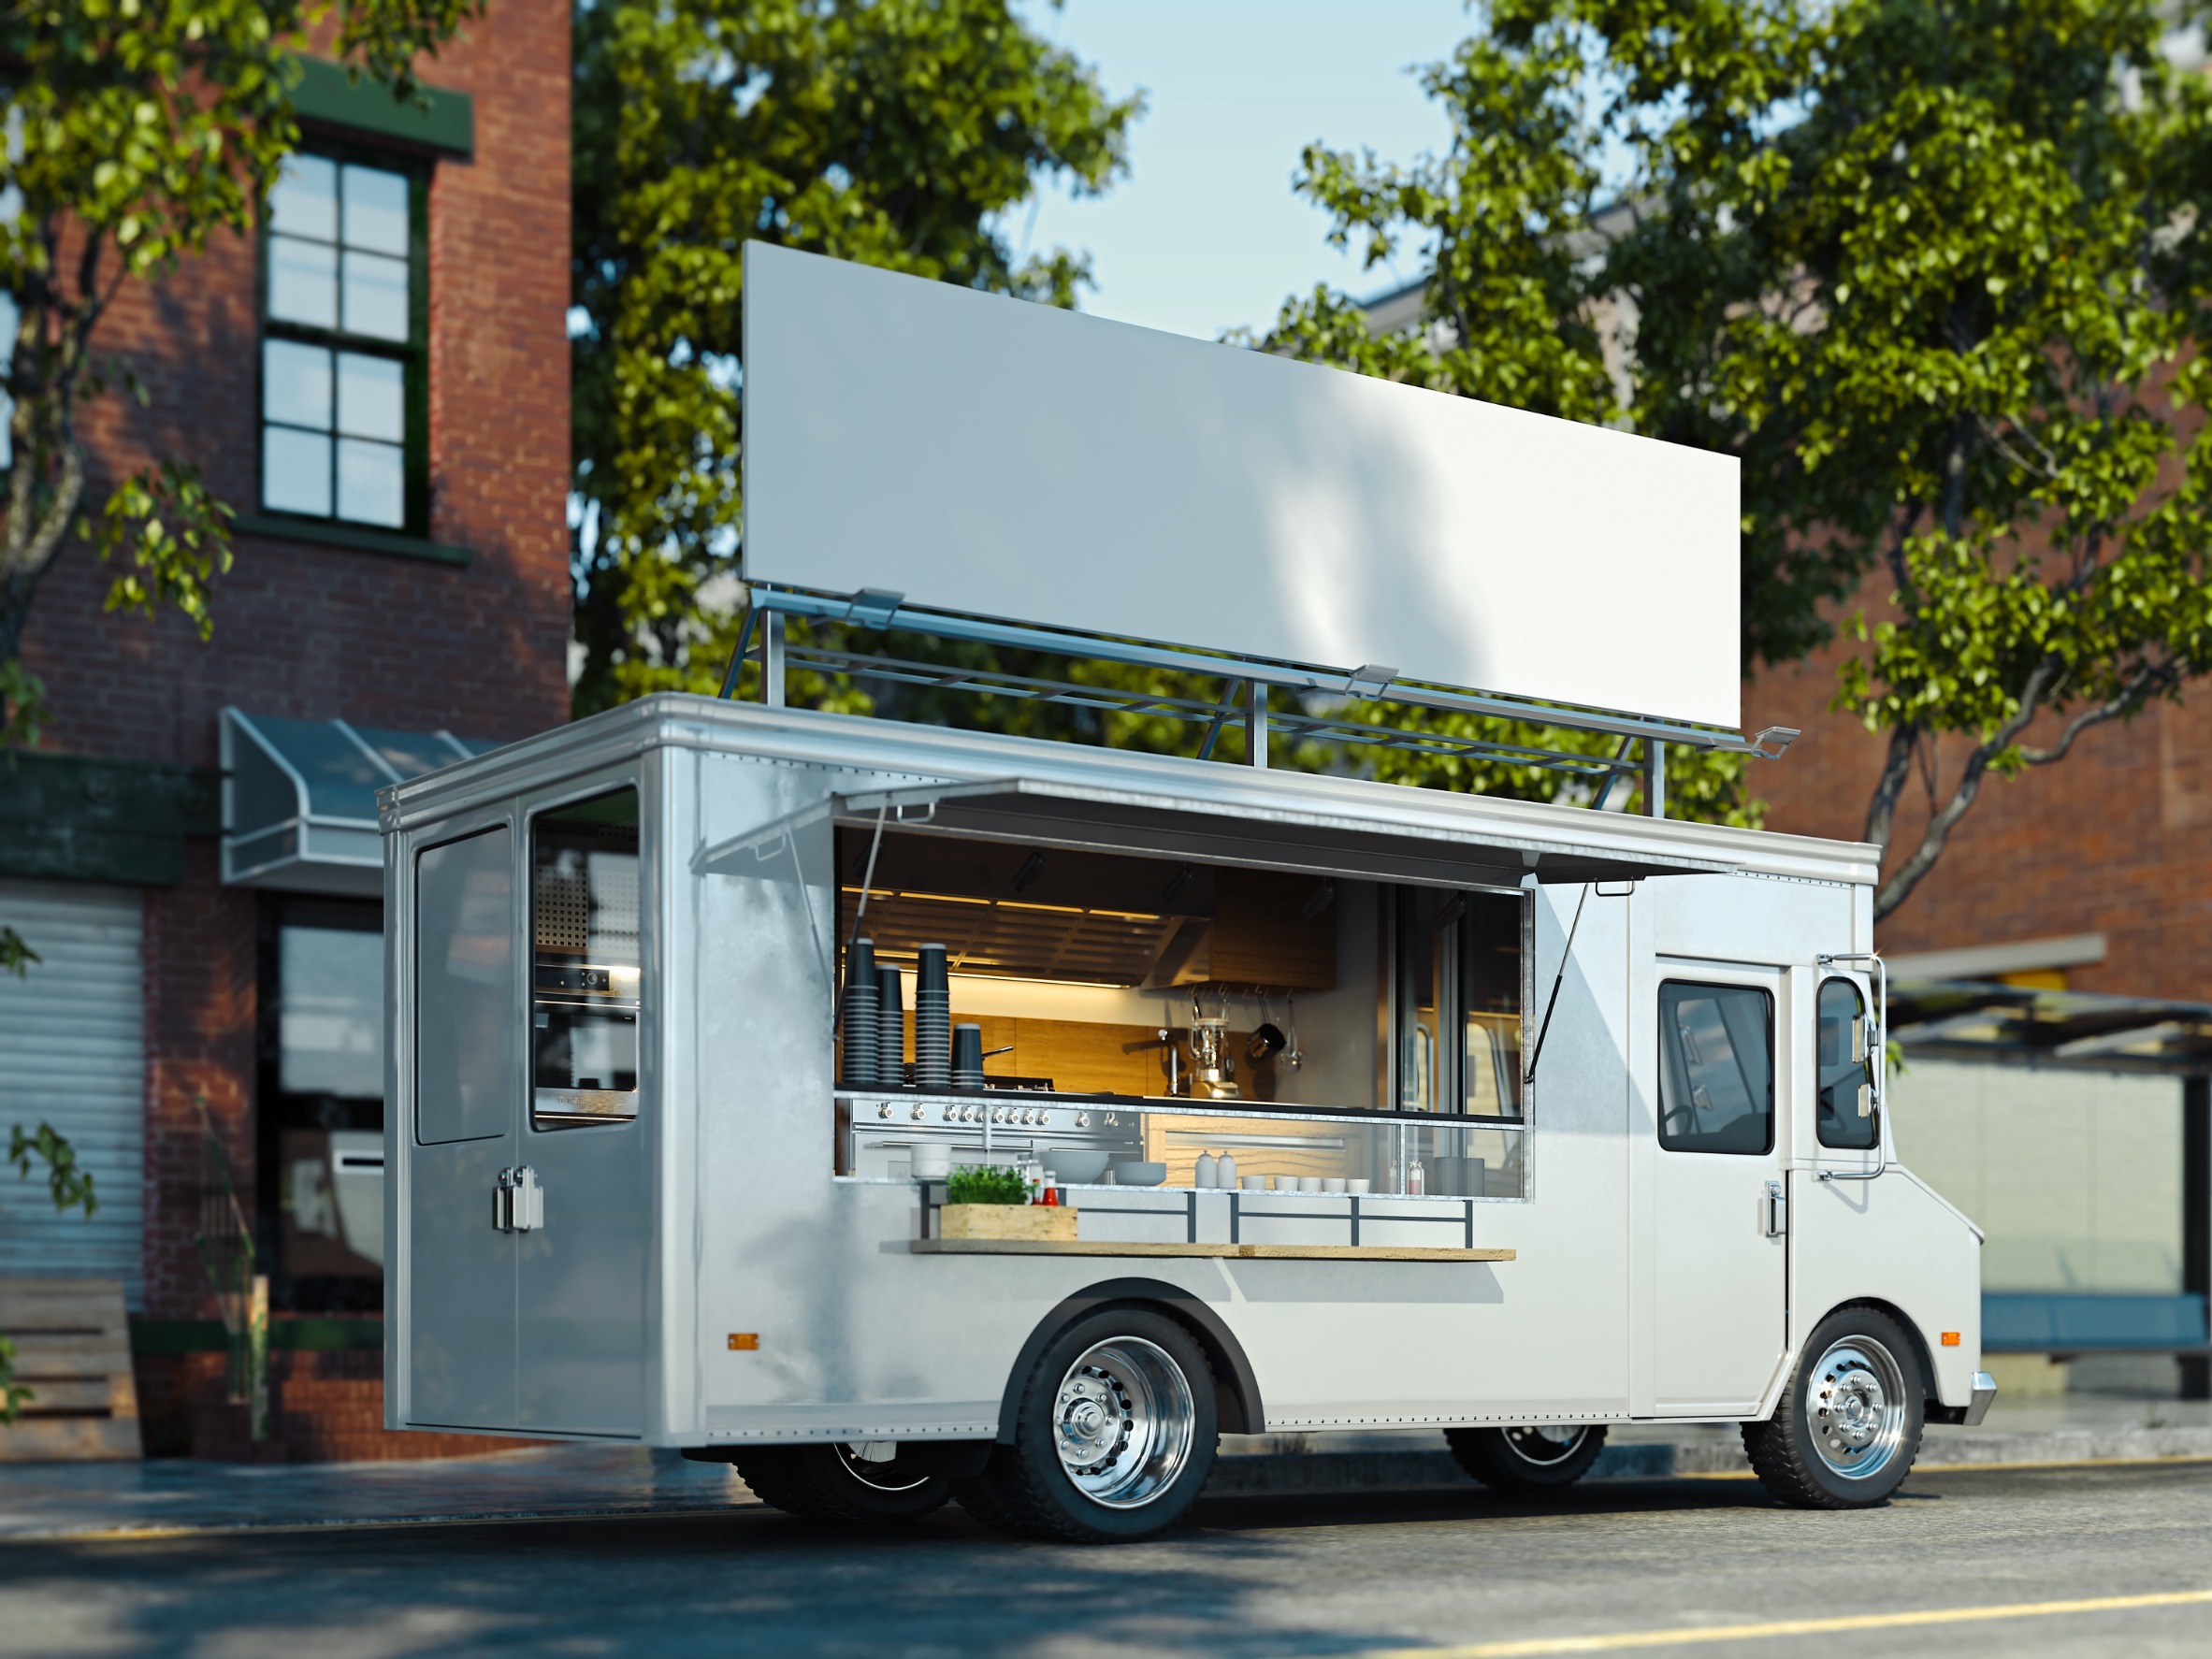 The Complete Guide to Building a Food Truck